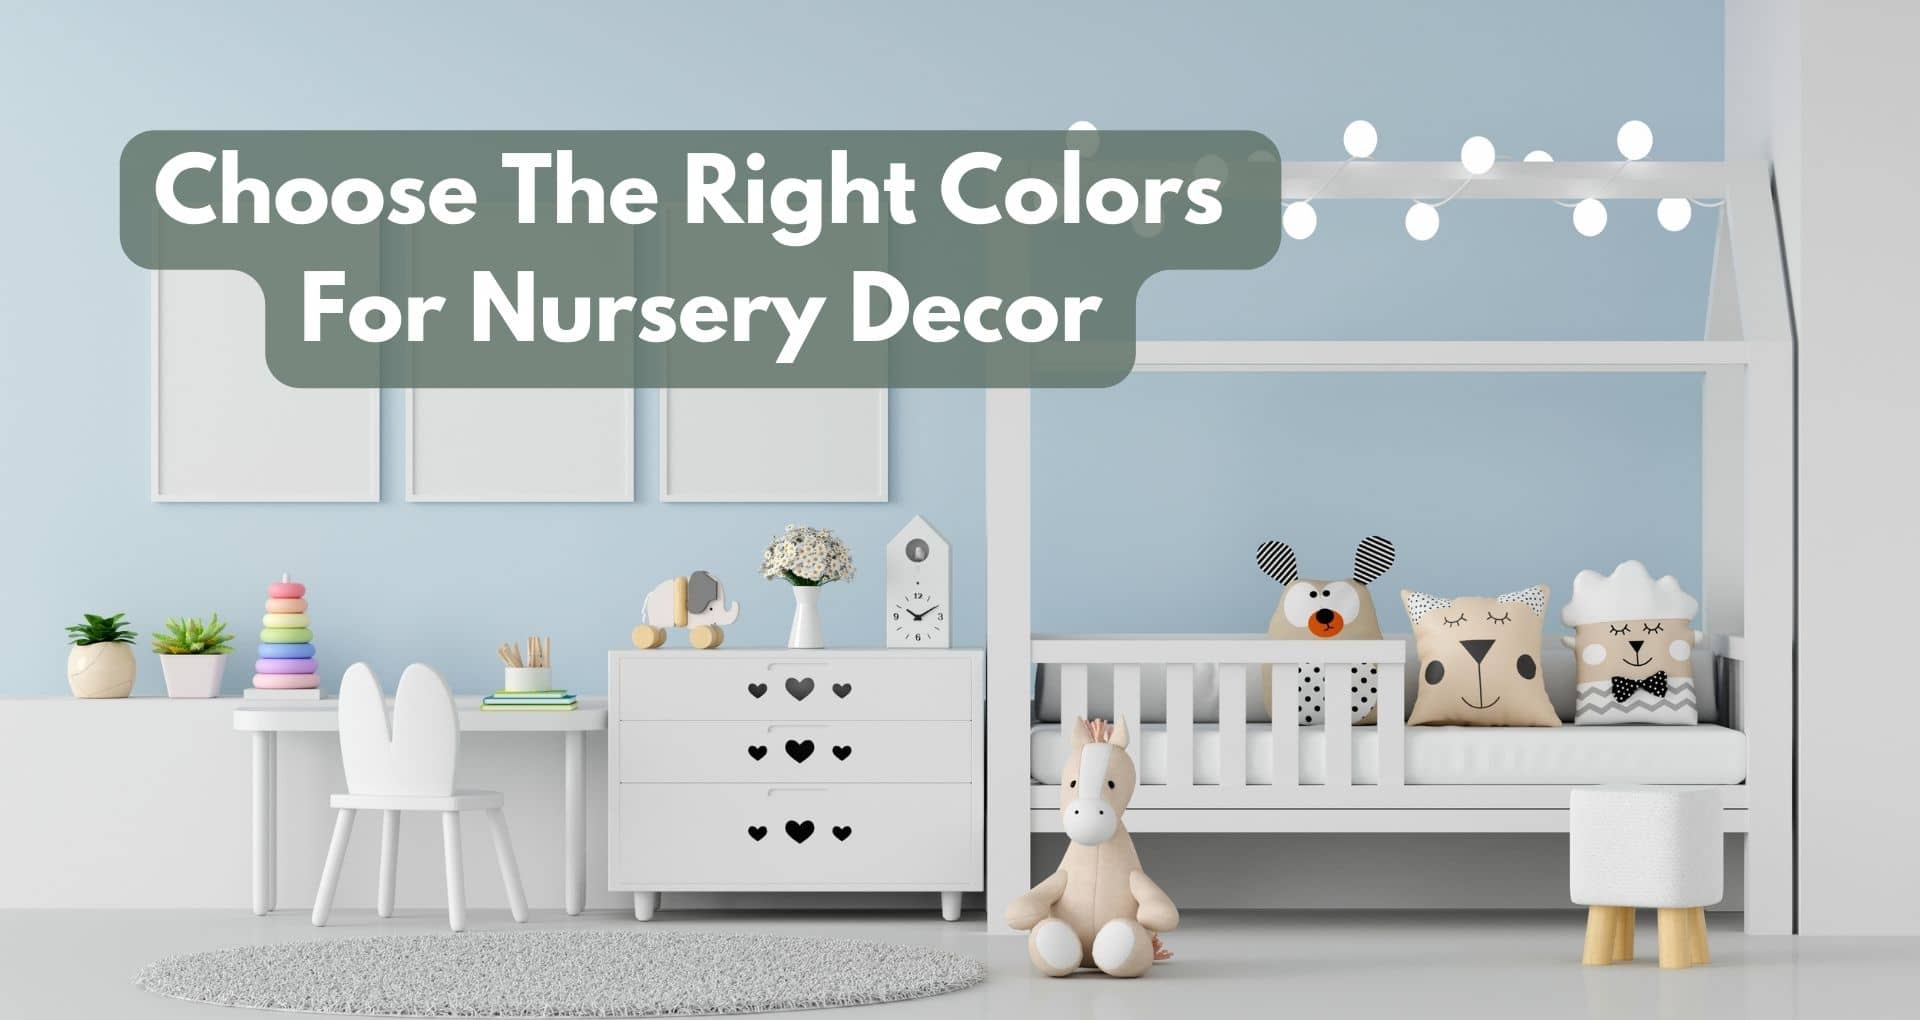 How Do I Choose The Right Colors For Nursery Decor